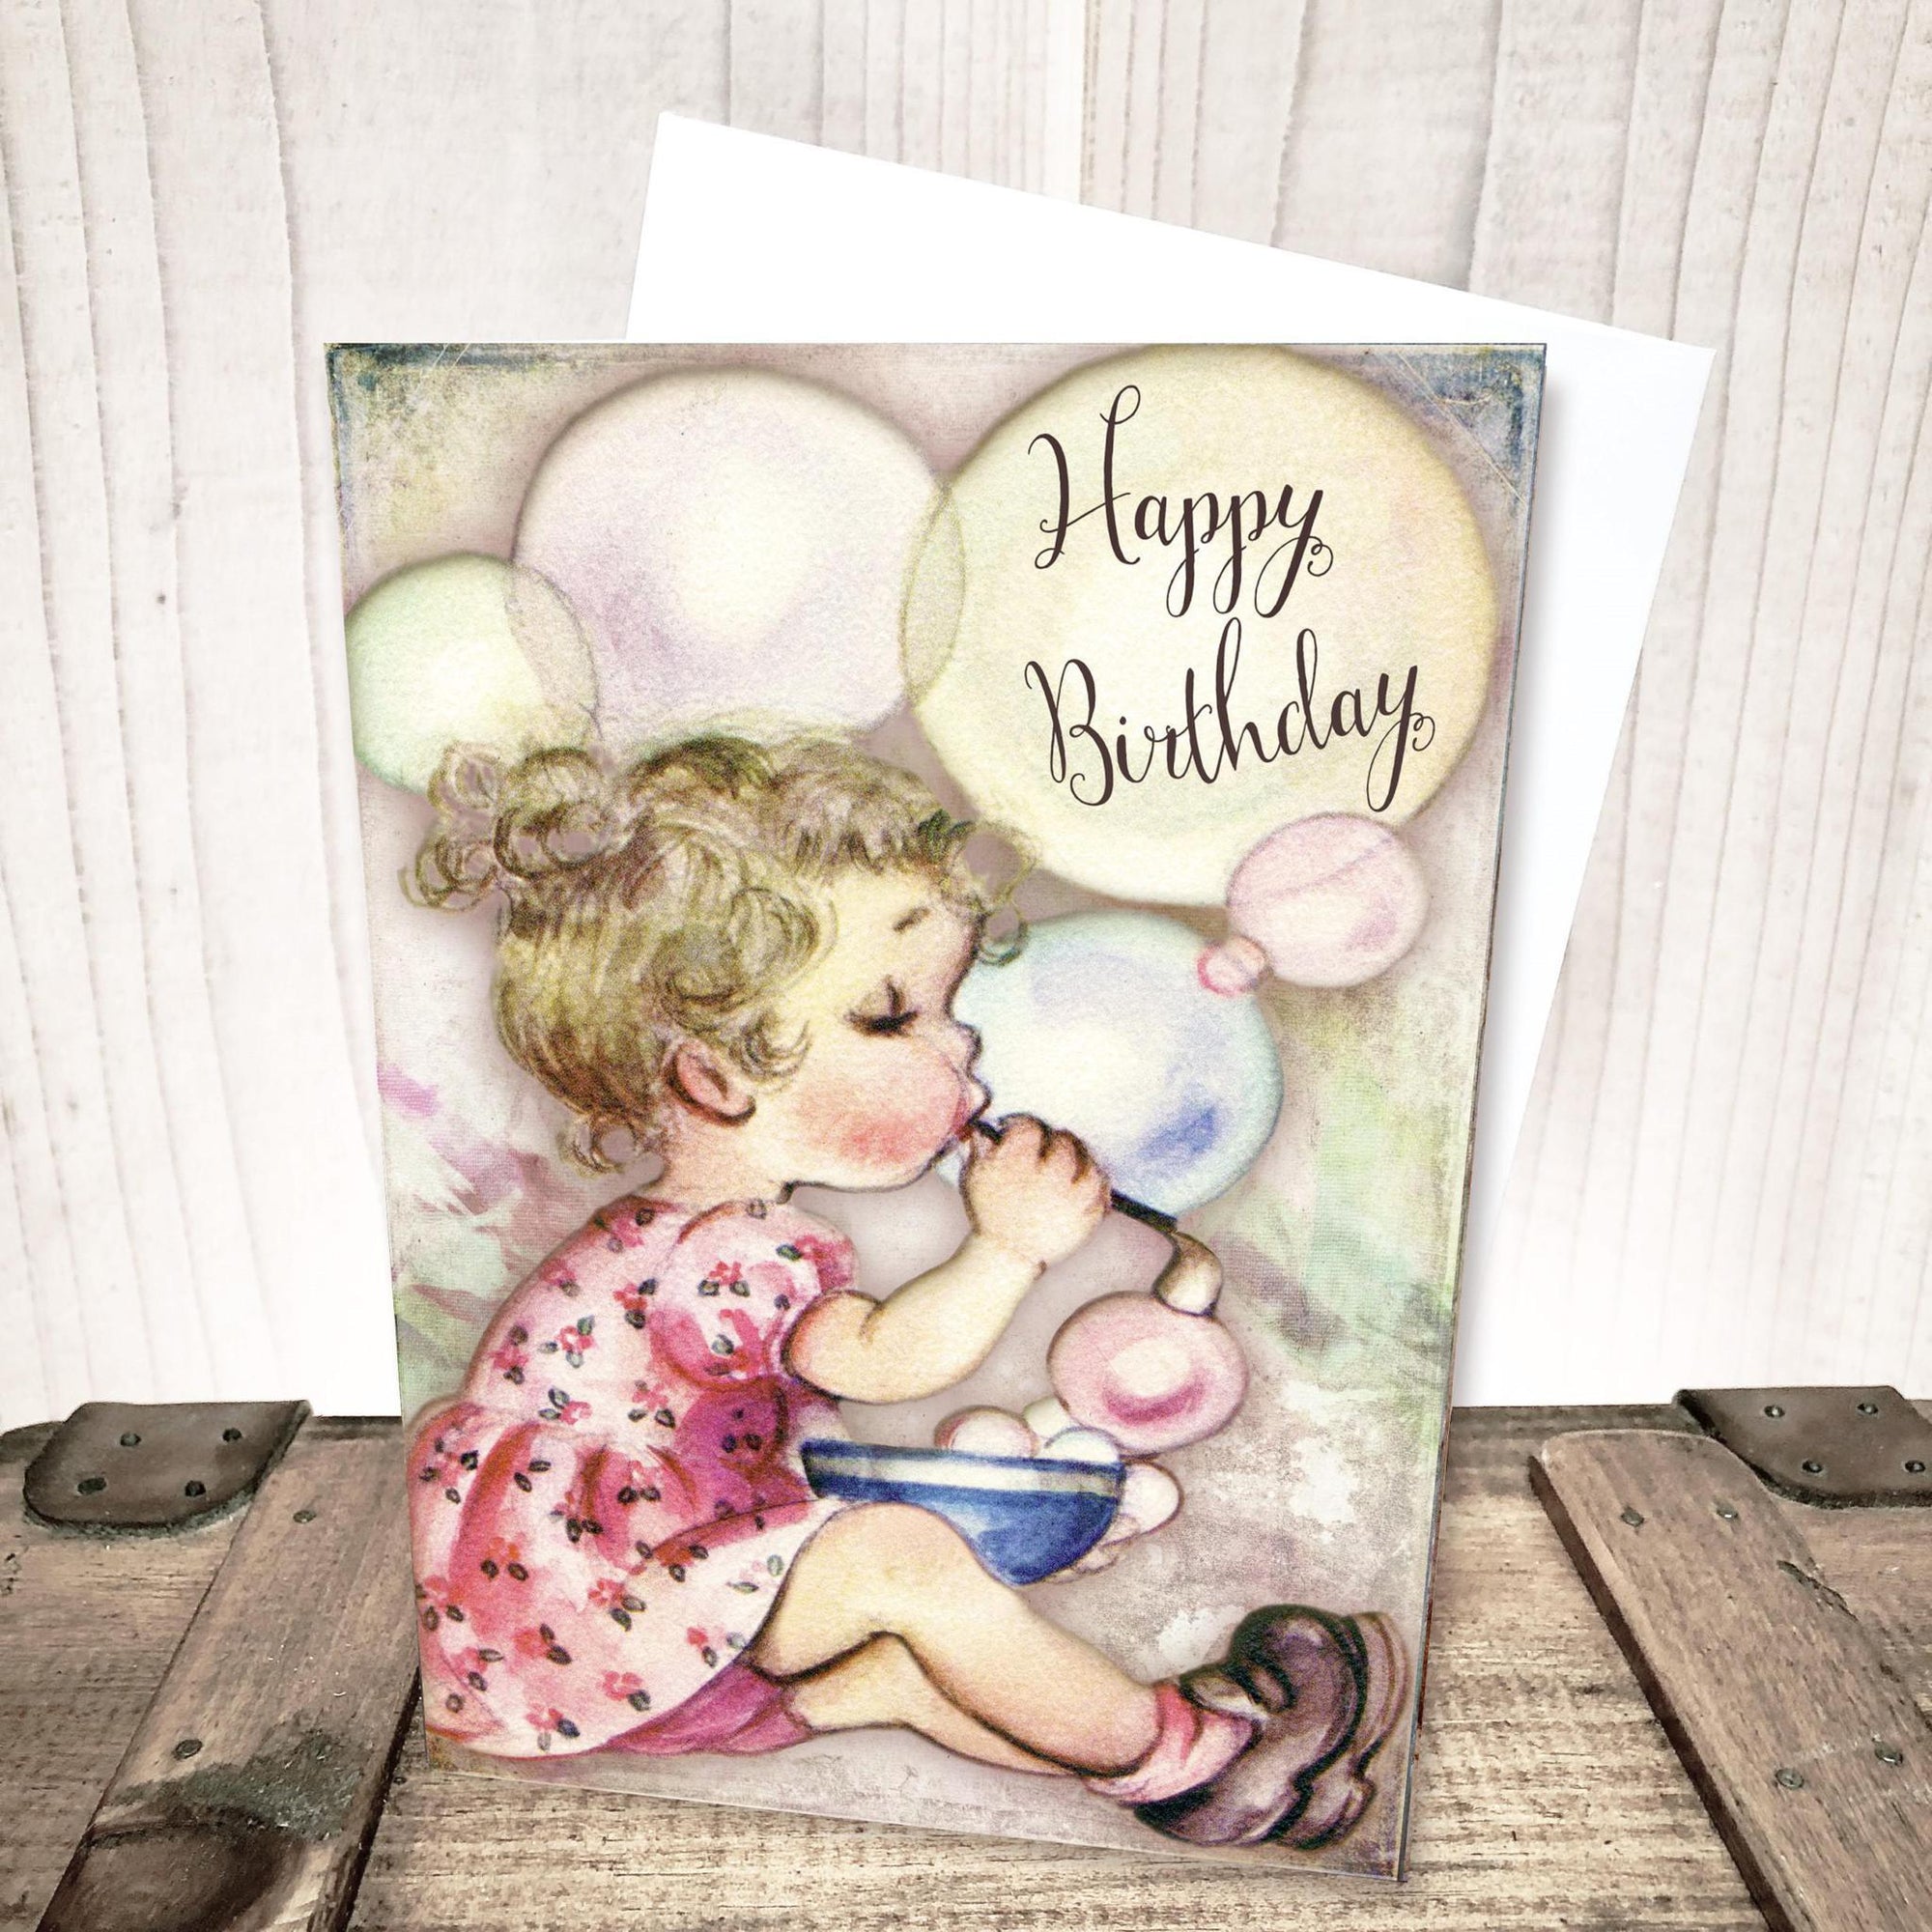 Blowing Bubbles Birthday Card by Yesterday's Best